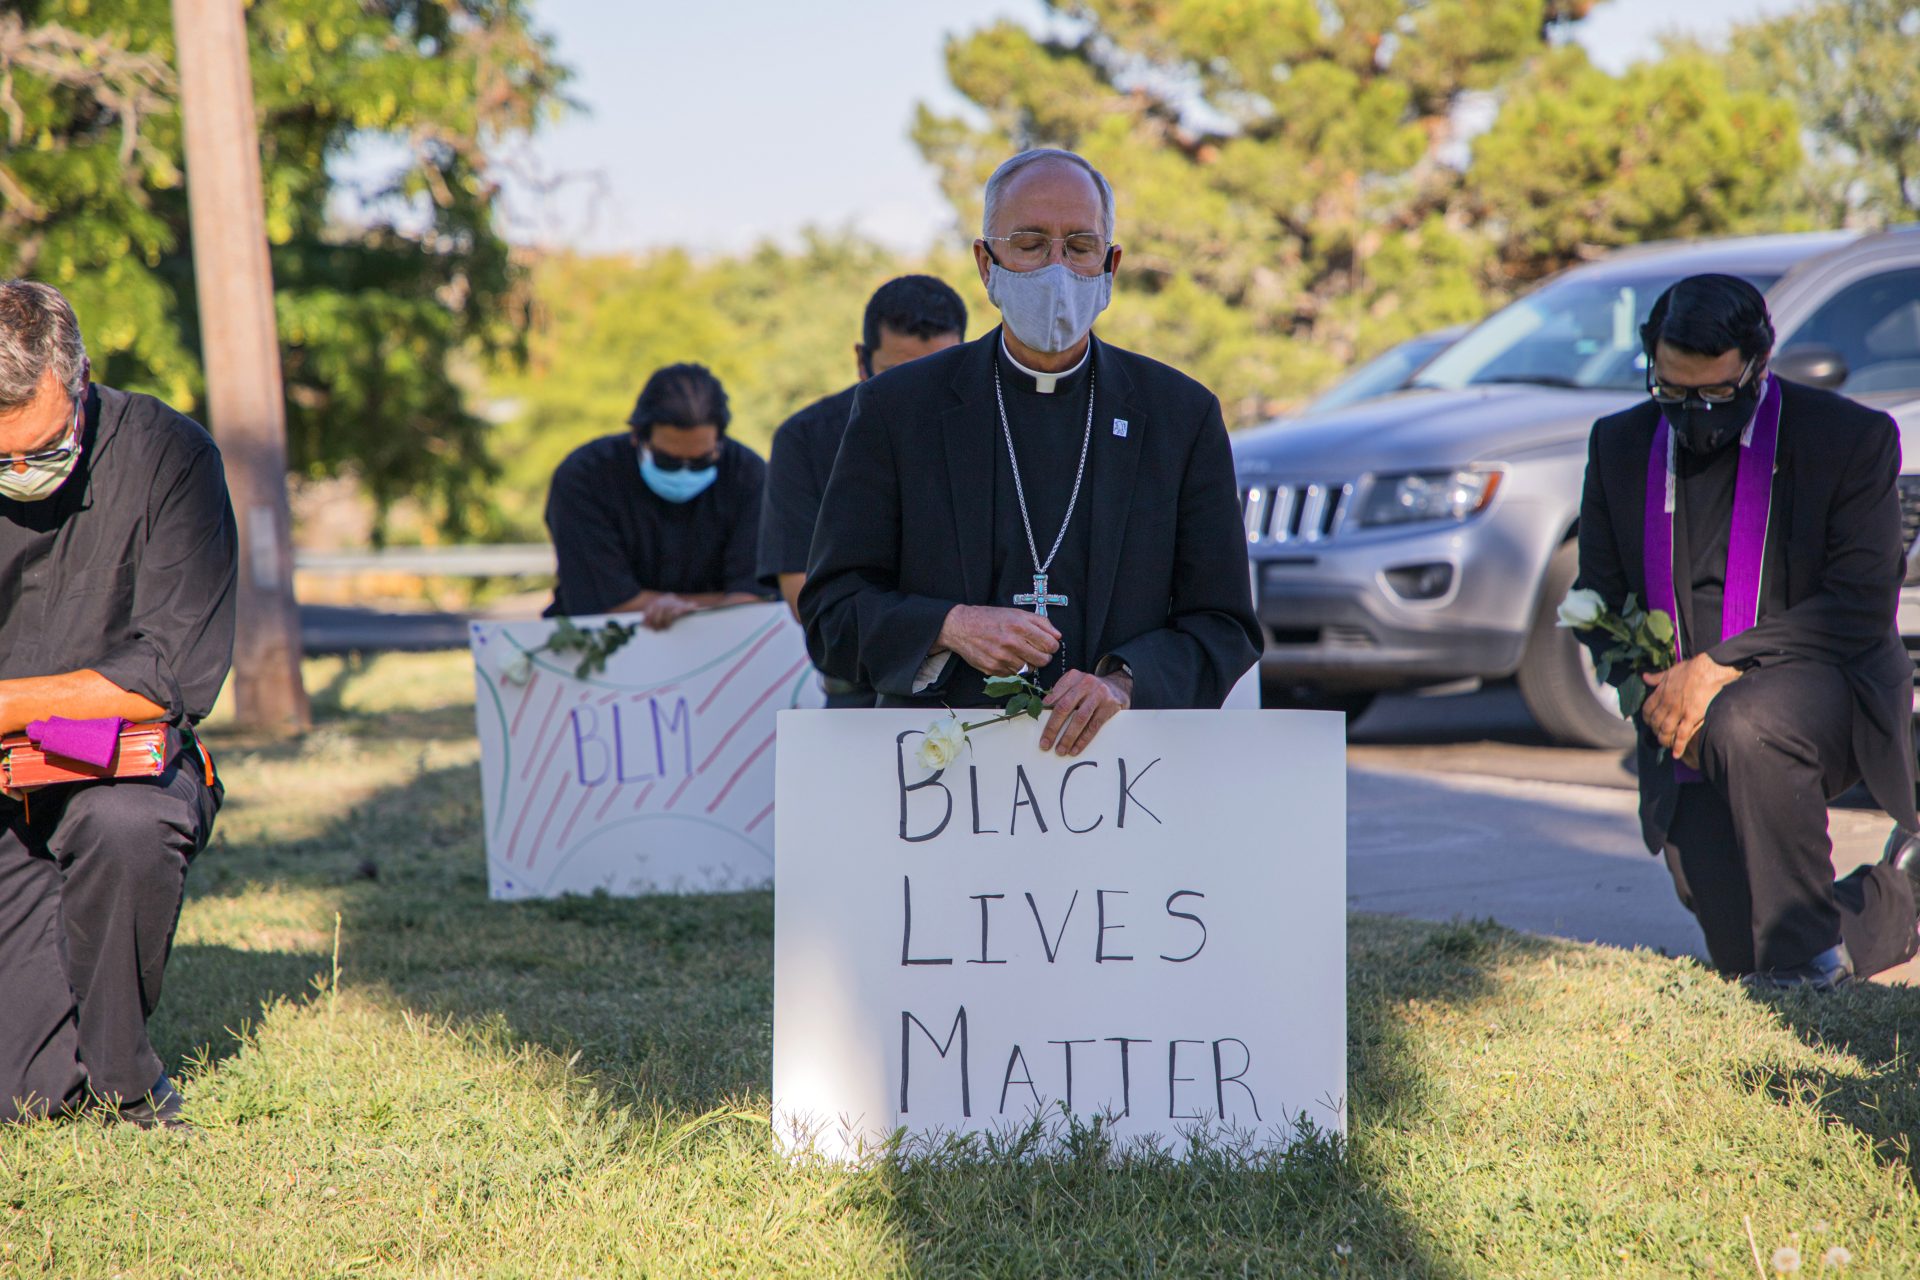 In this June 1, 2020, photo provided by the Catholic Diocese of El Paso, Bishop Mark Seitz, center, kneels with other demonstrators at Memorial Park holding a Black Lives Matter sign in El Paso, Texas. Pope Francis called Seitz unexpectedly after he was photographed at the protest.